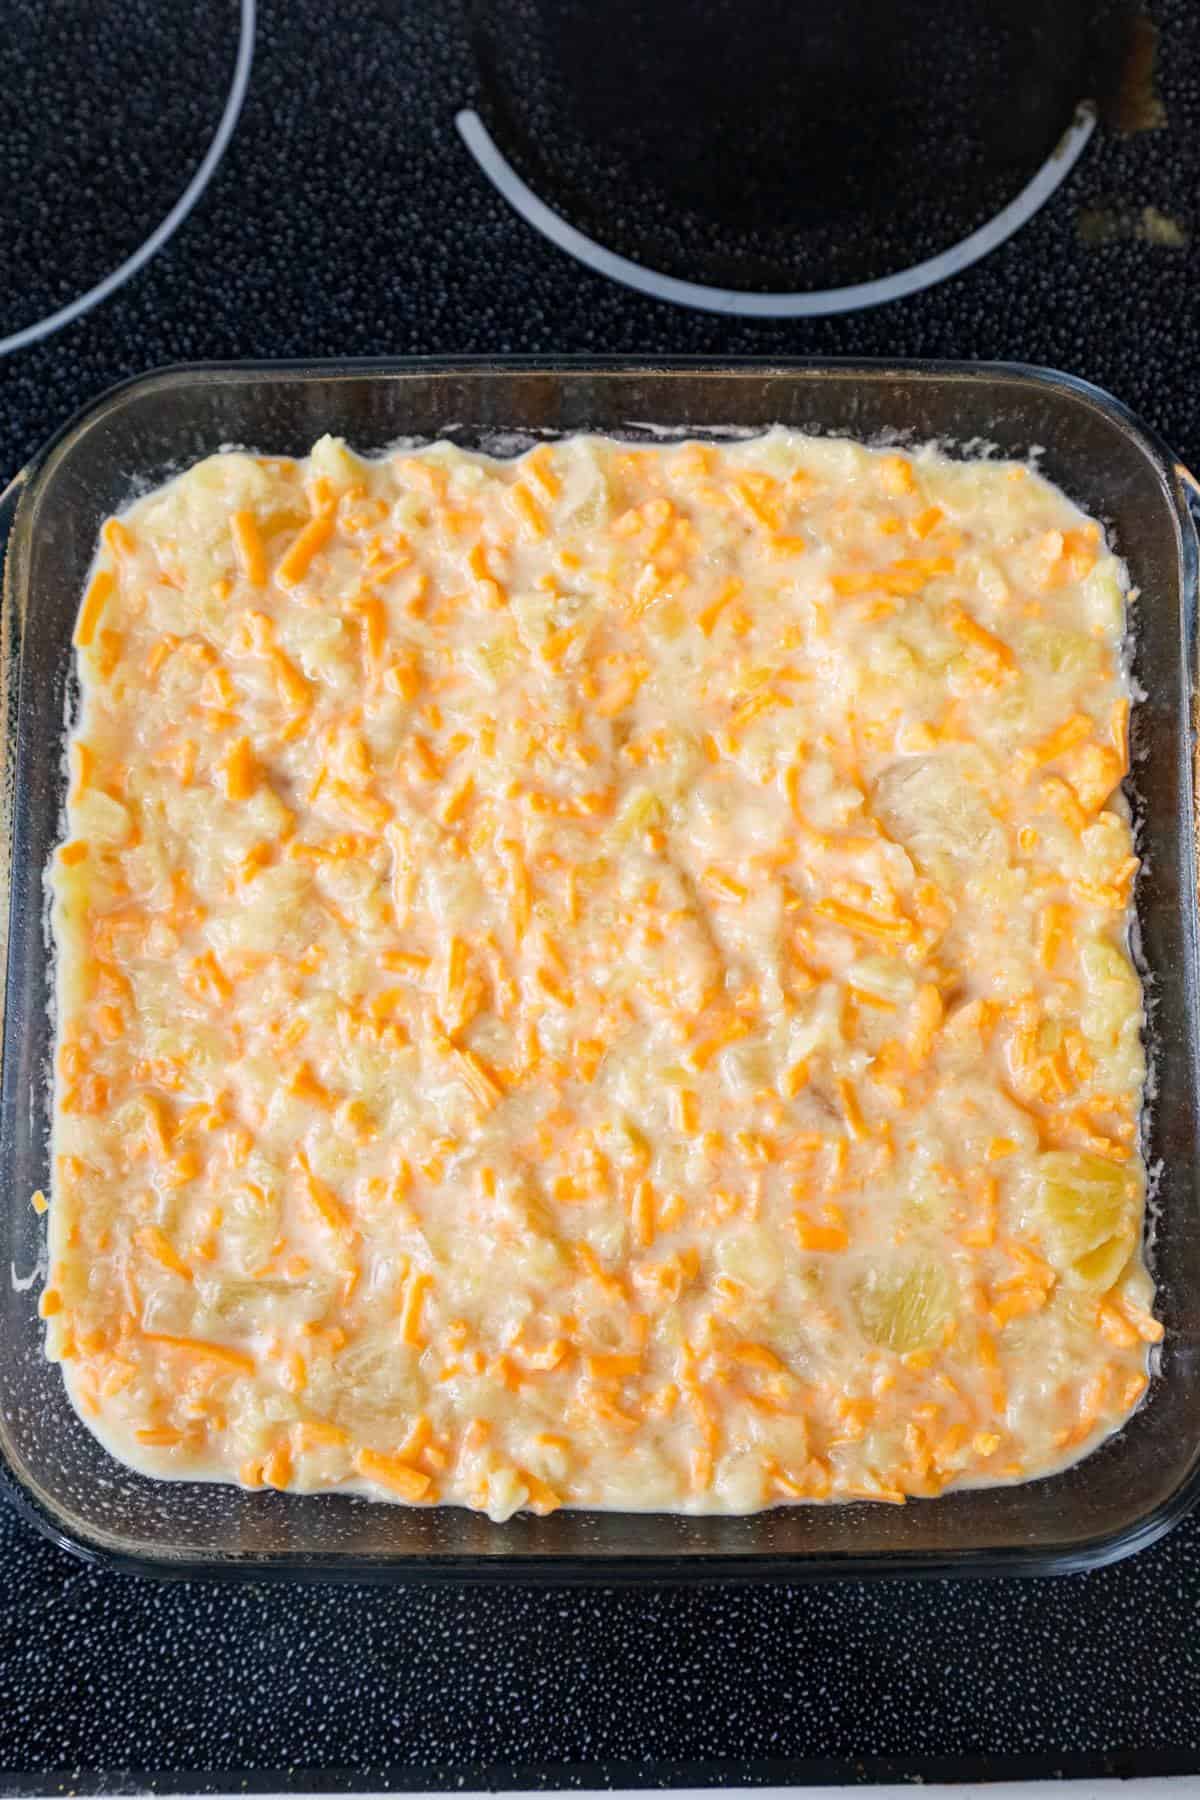 pineapple and cheese mixture in a baking dish